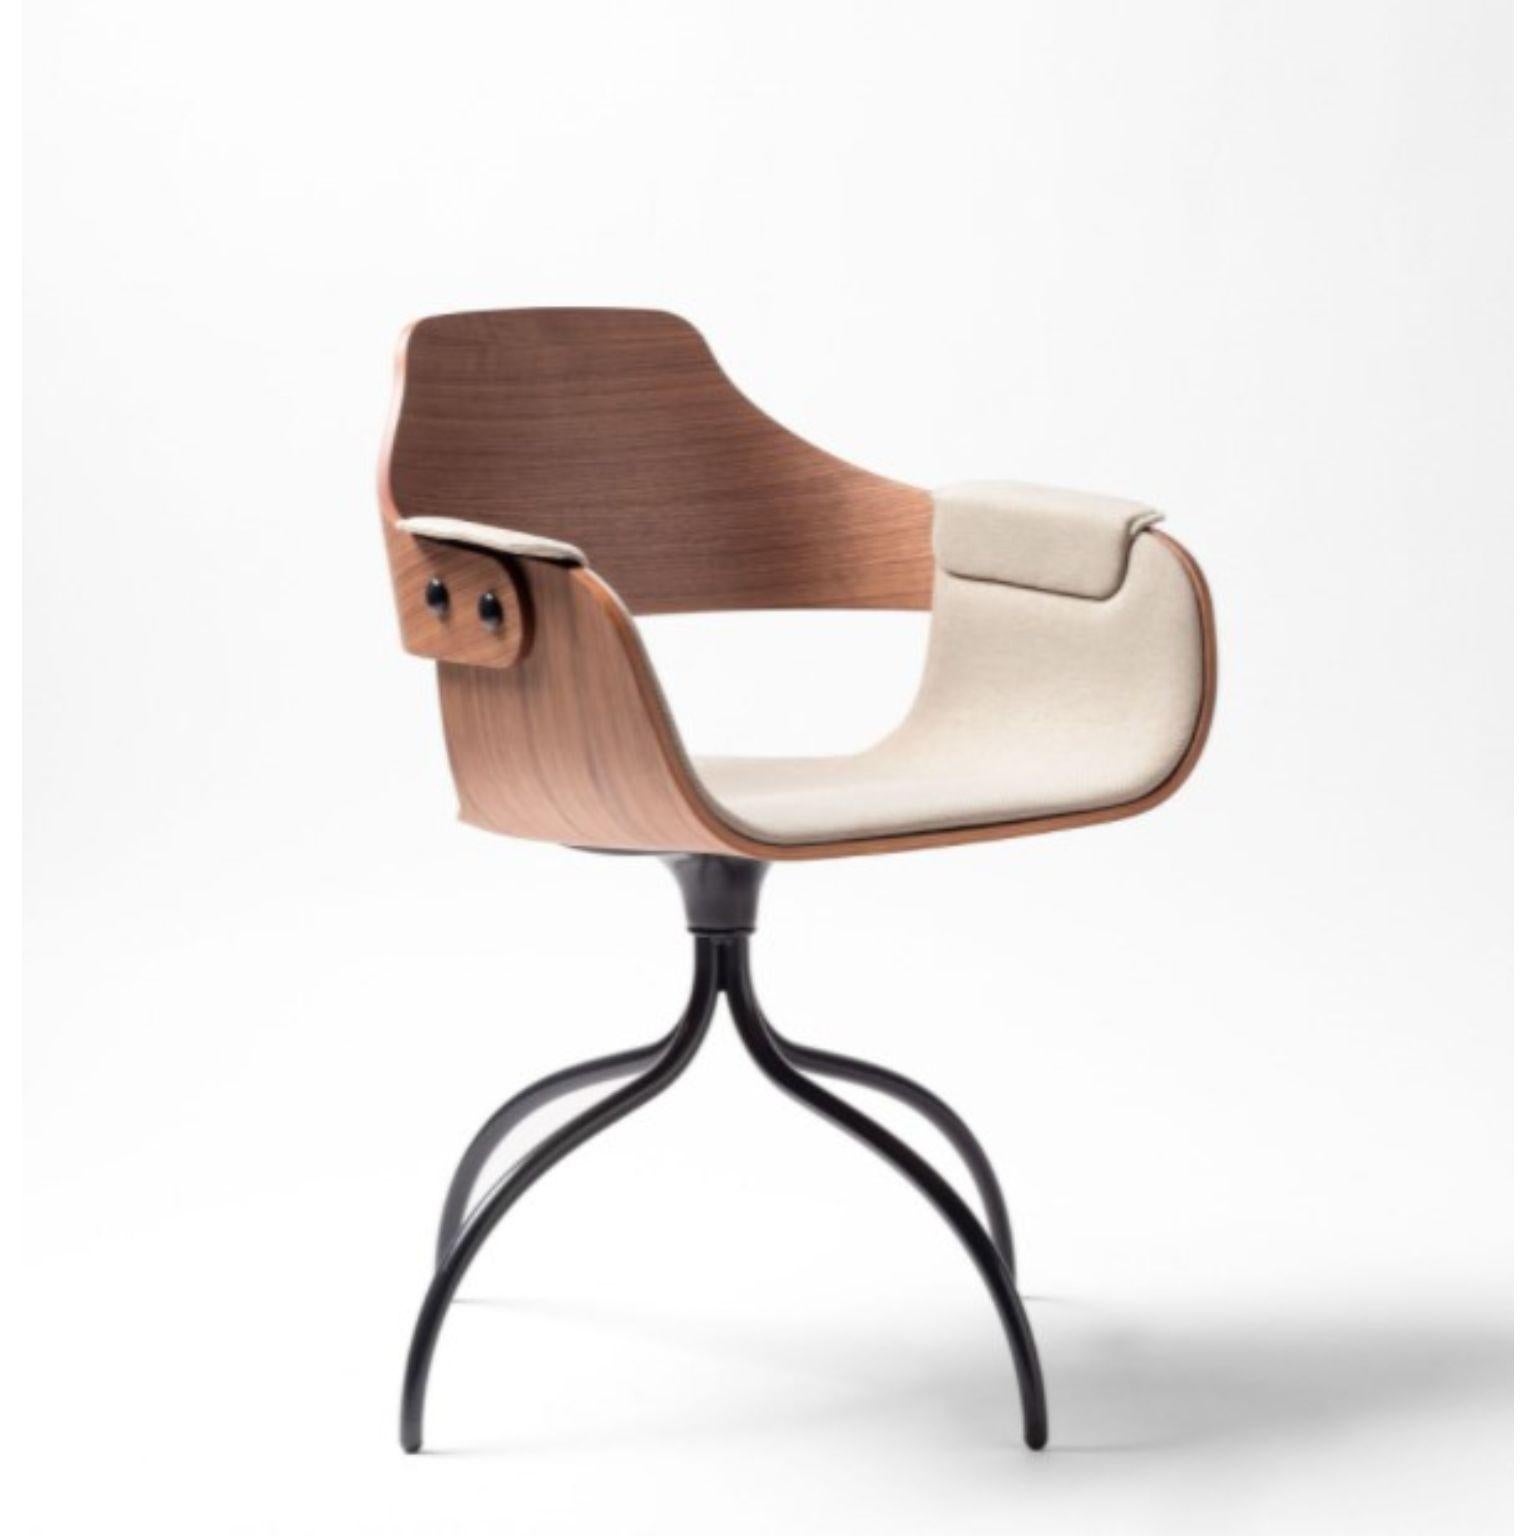 Swivel Base Showtime Beige Chair by Jaime Hayon
Dimensions: D 55 x W 55 x H 79 cm 
Materials: Powder-coated steel or aluminum structure. Legs, seat, and backrest in plywood with exteriors in natural ash, walnut, or ash stained black. Metallic